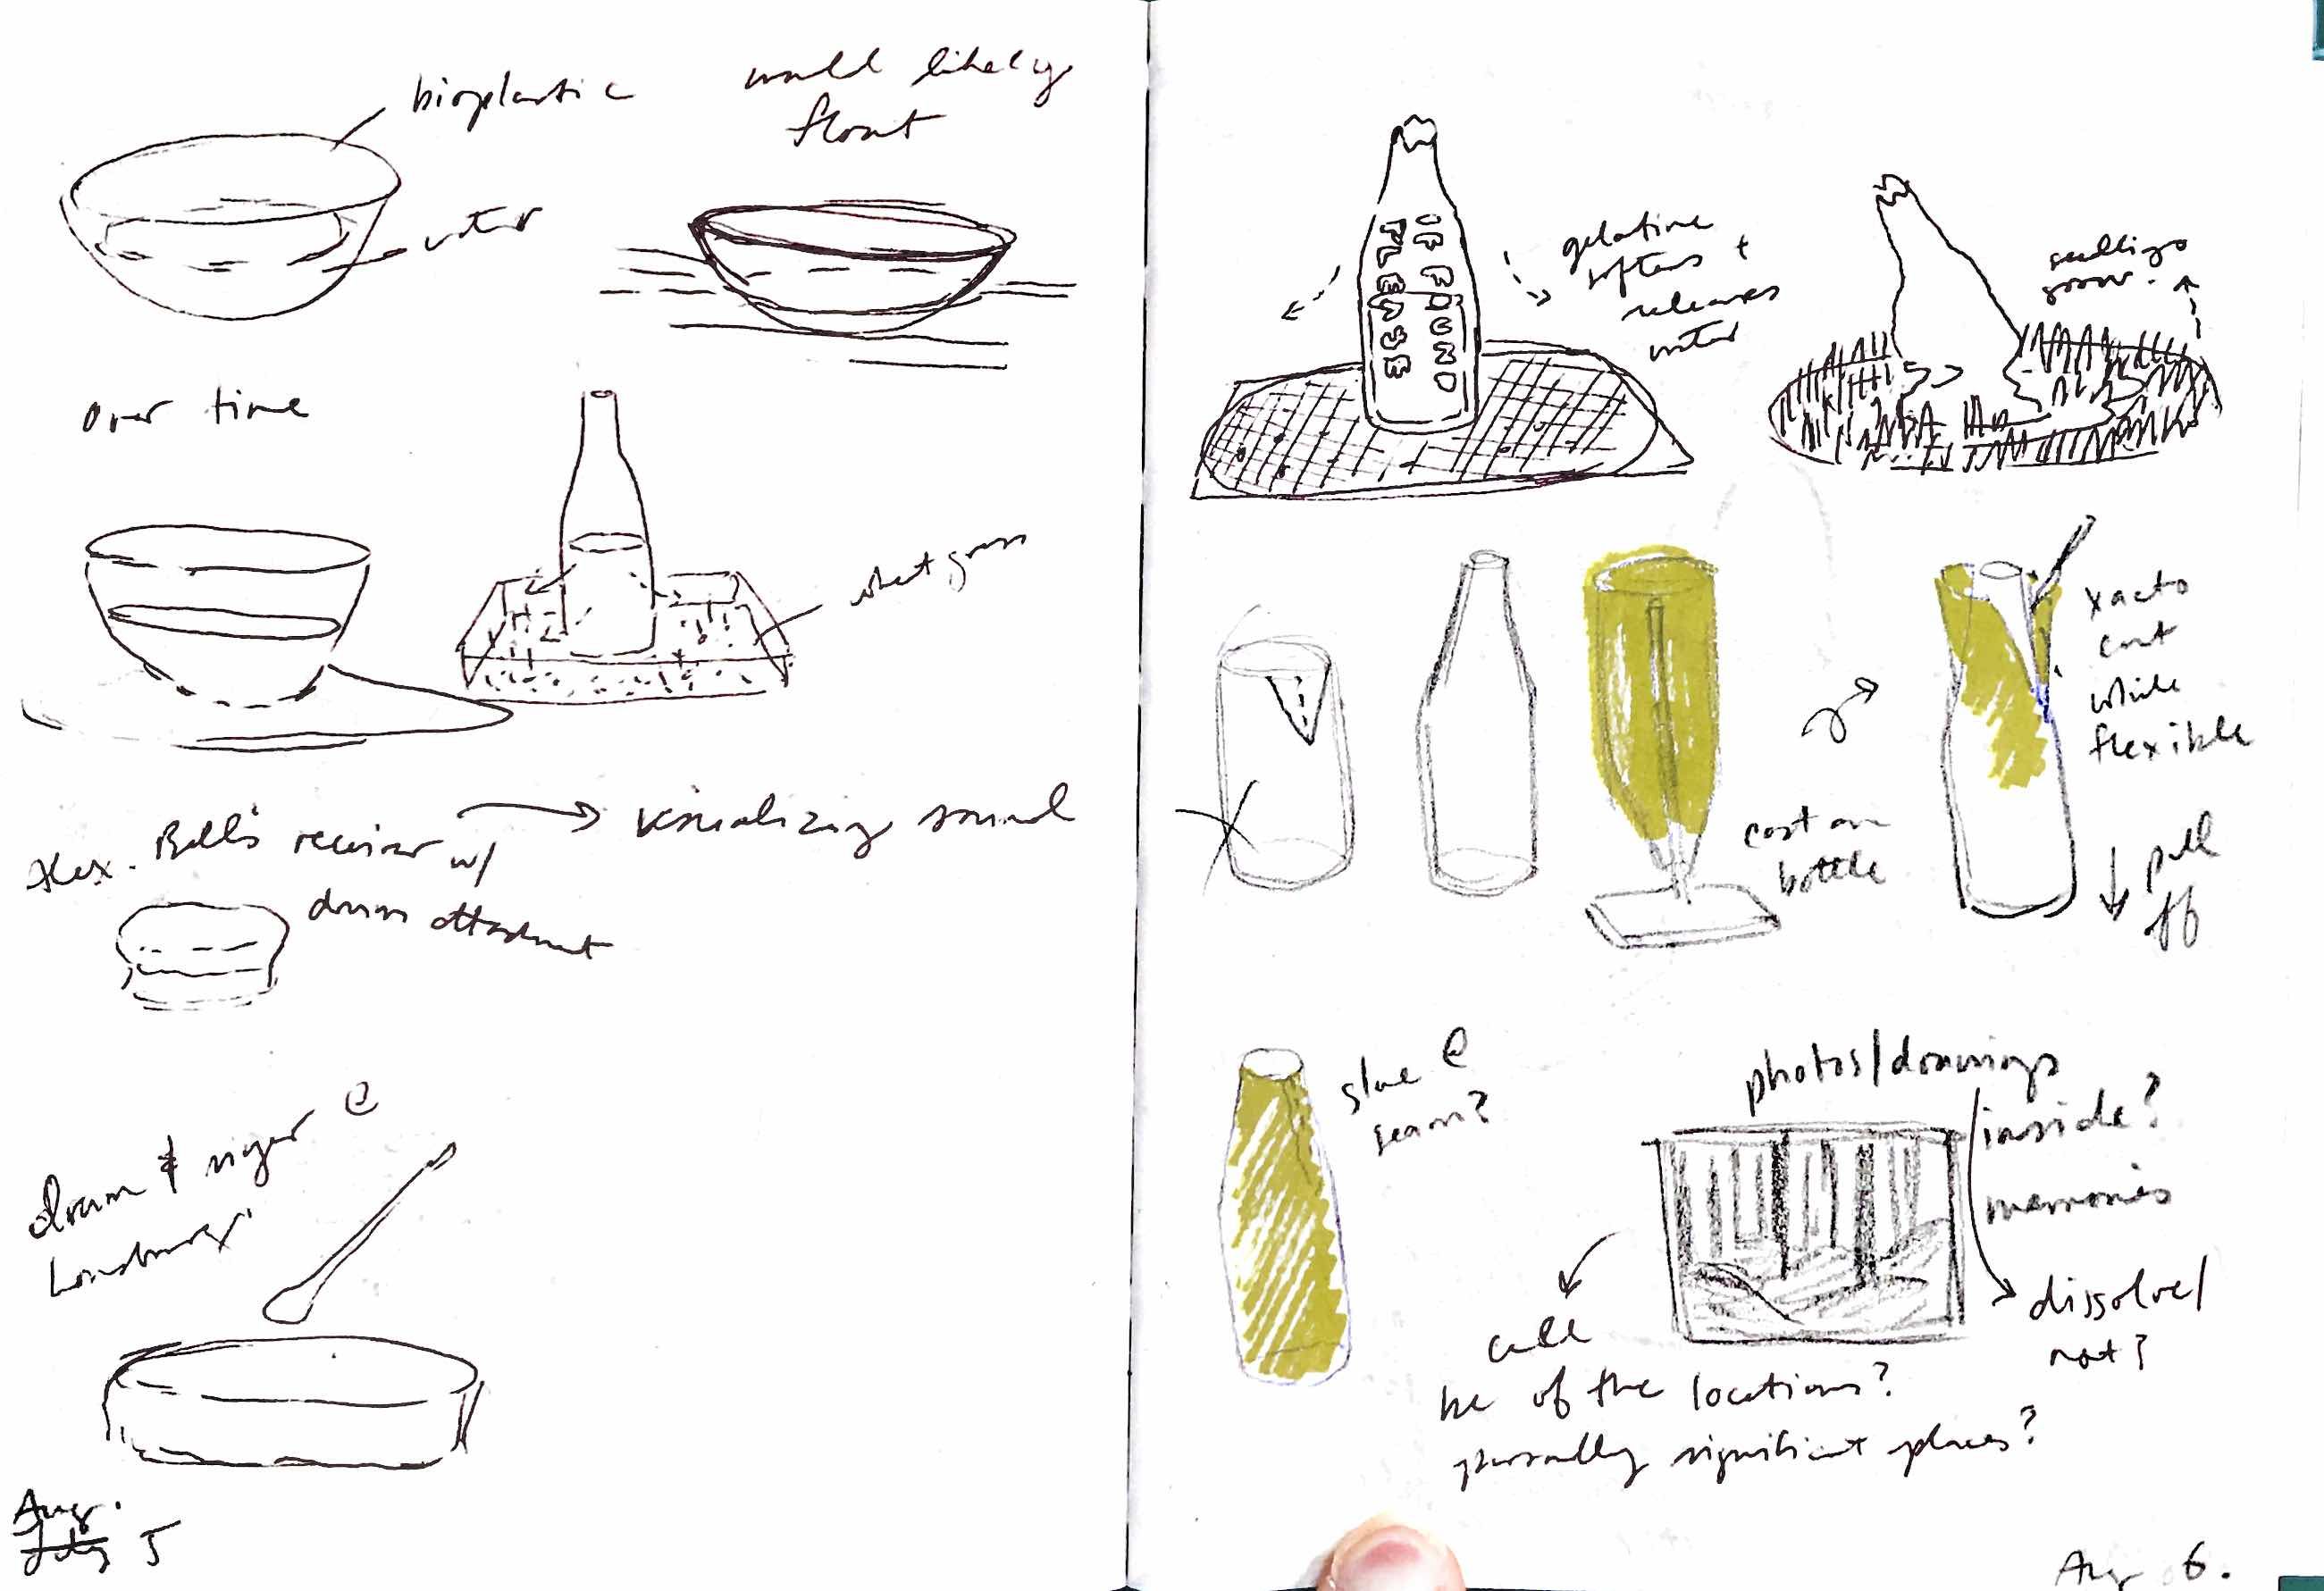 sketchbook page of notes thinking through how to create the bottle